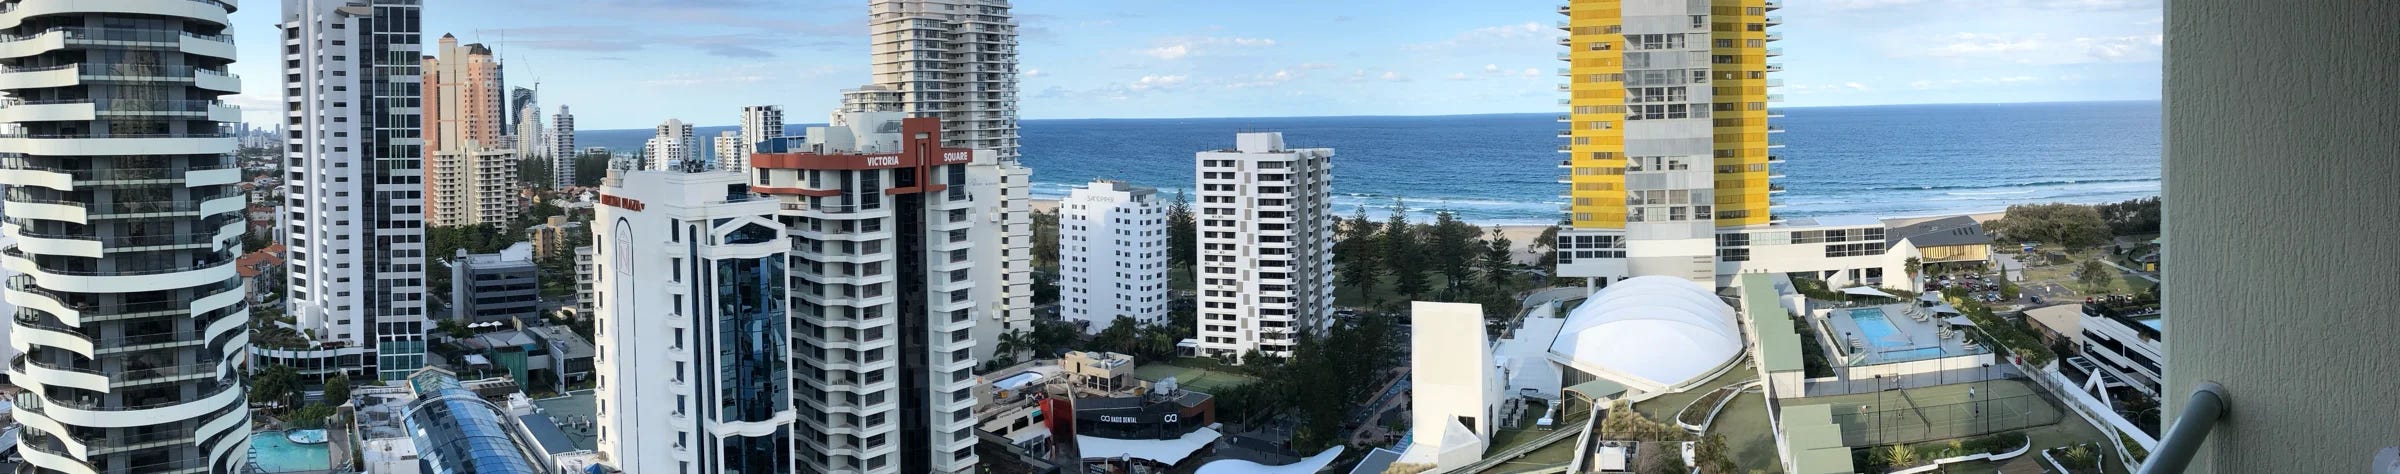 Looking through high rise buildings toward the ocean on the Gold Coast, Queensland.